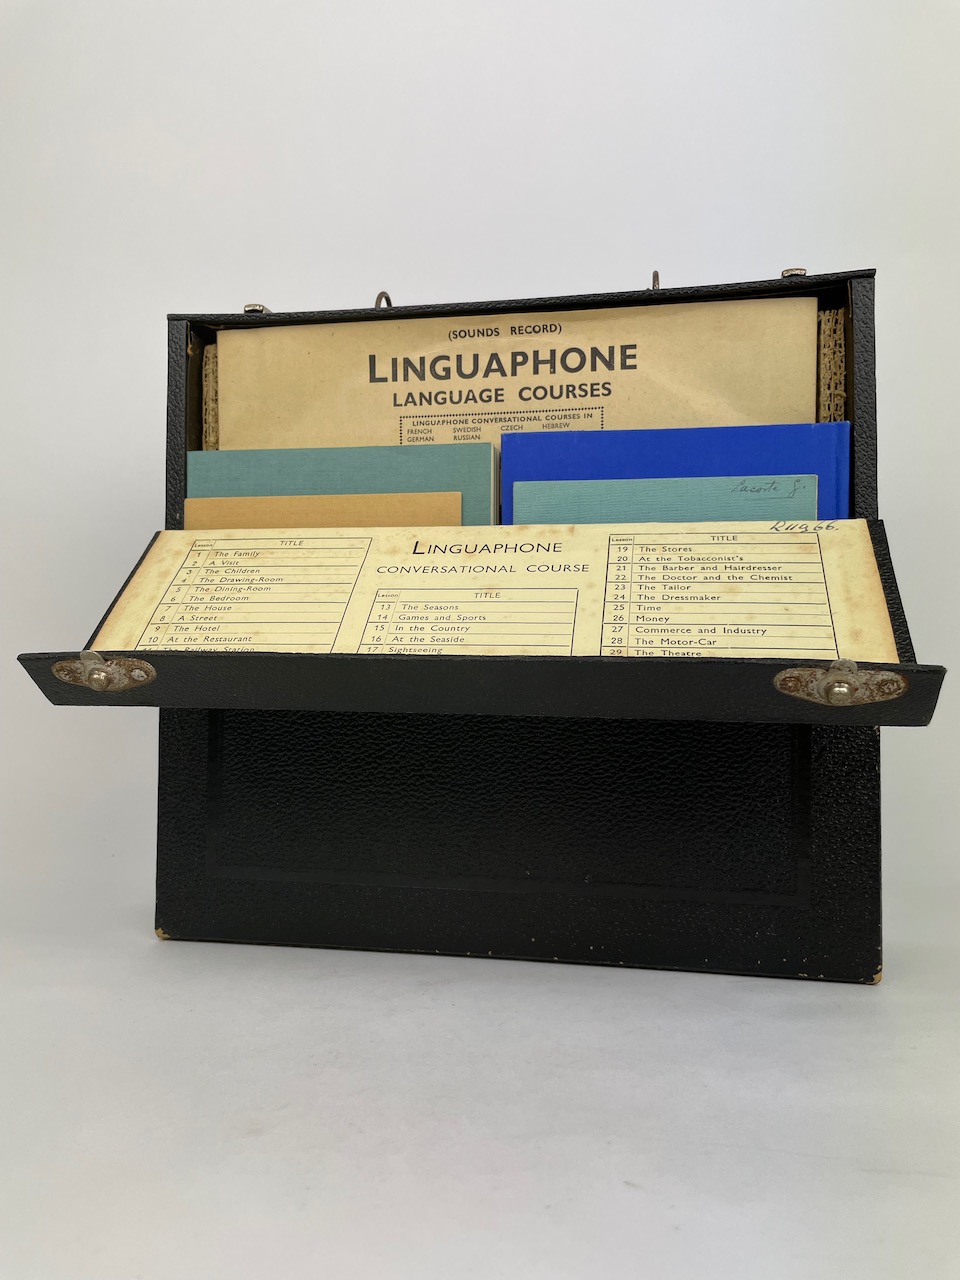 Linguaphone Conversational Course English - Complete set - 16 records and 5 booklets in original box